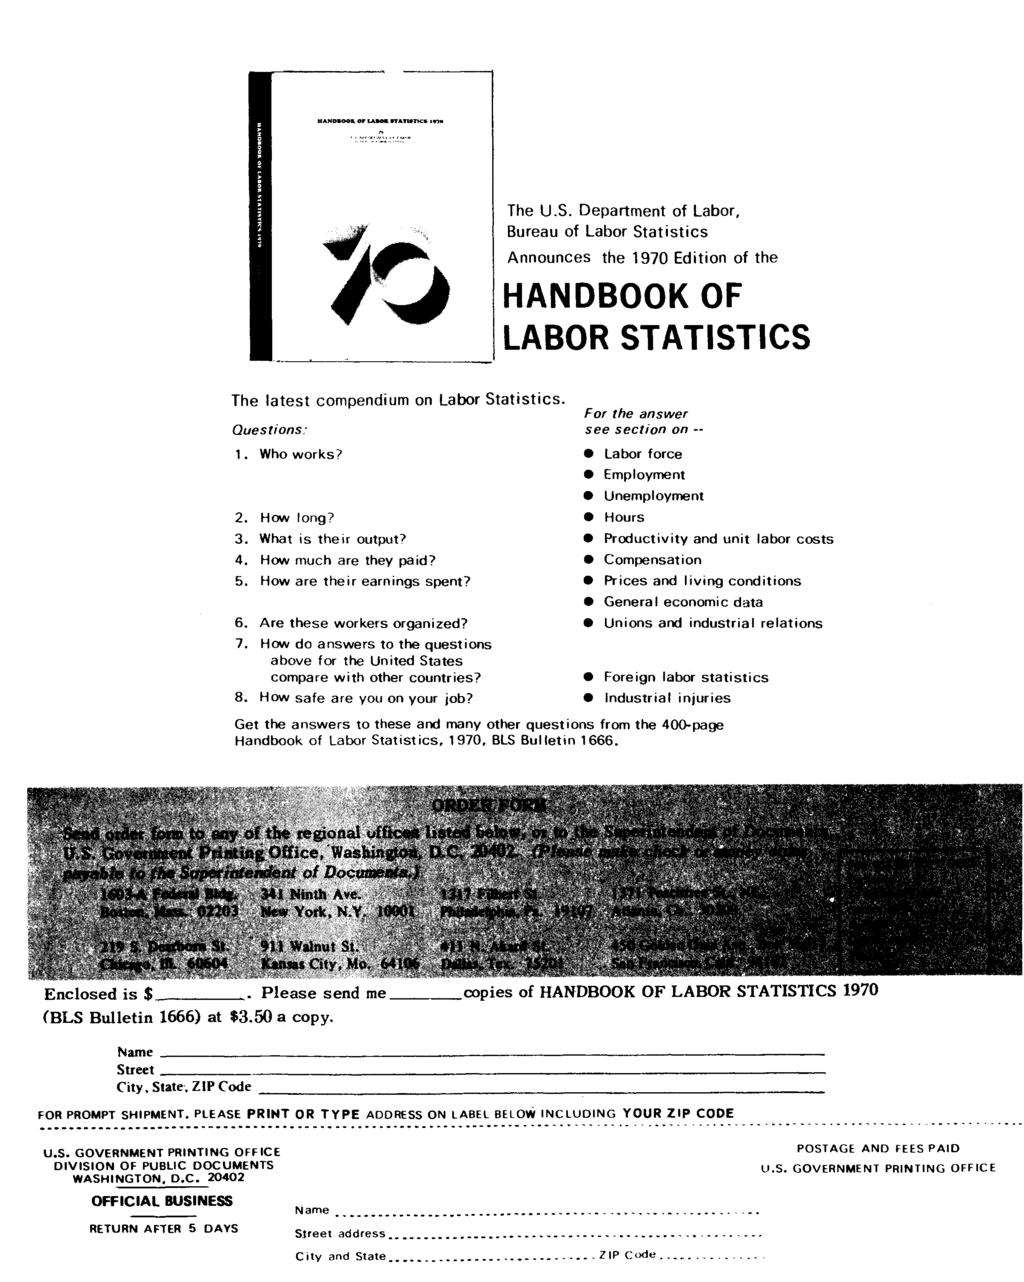 The, Announces the Edition of the HANDBOOK OF LABOR STATISTICS The latest compendium on Labor Statistics. Questions: 1. Who works? 2. How long? 3. What is their output? 4. How much are they paid? 5.